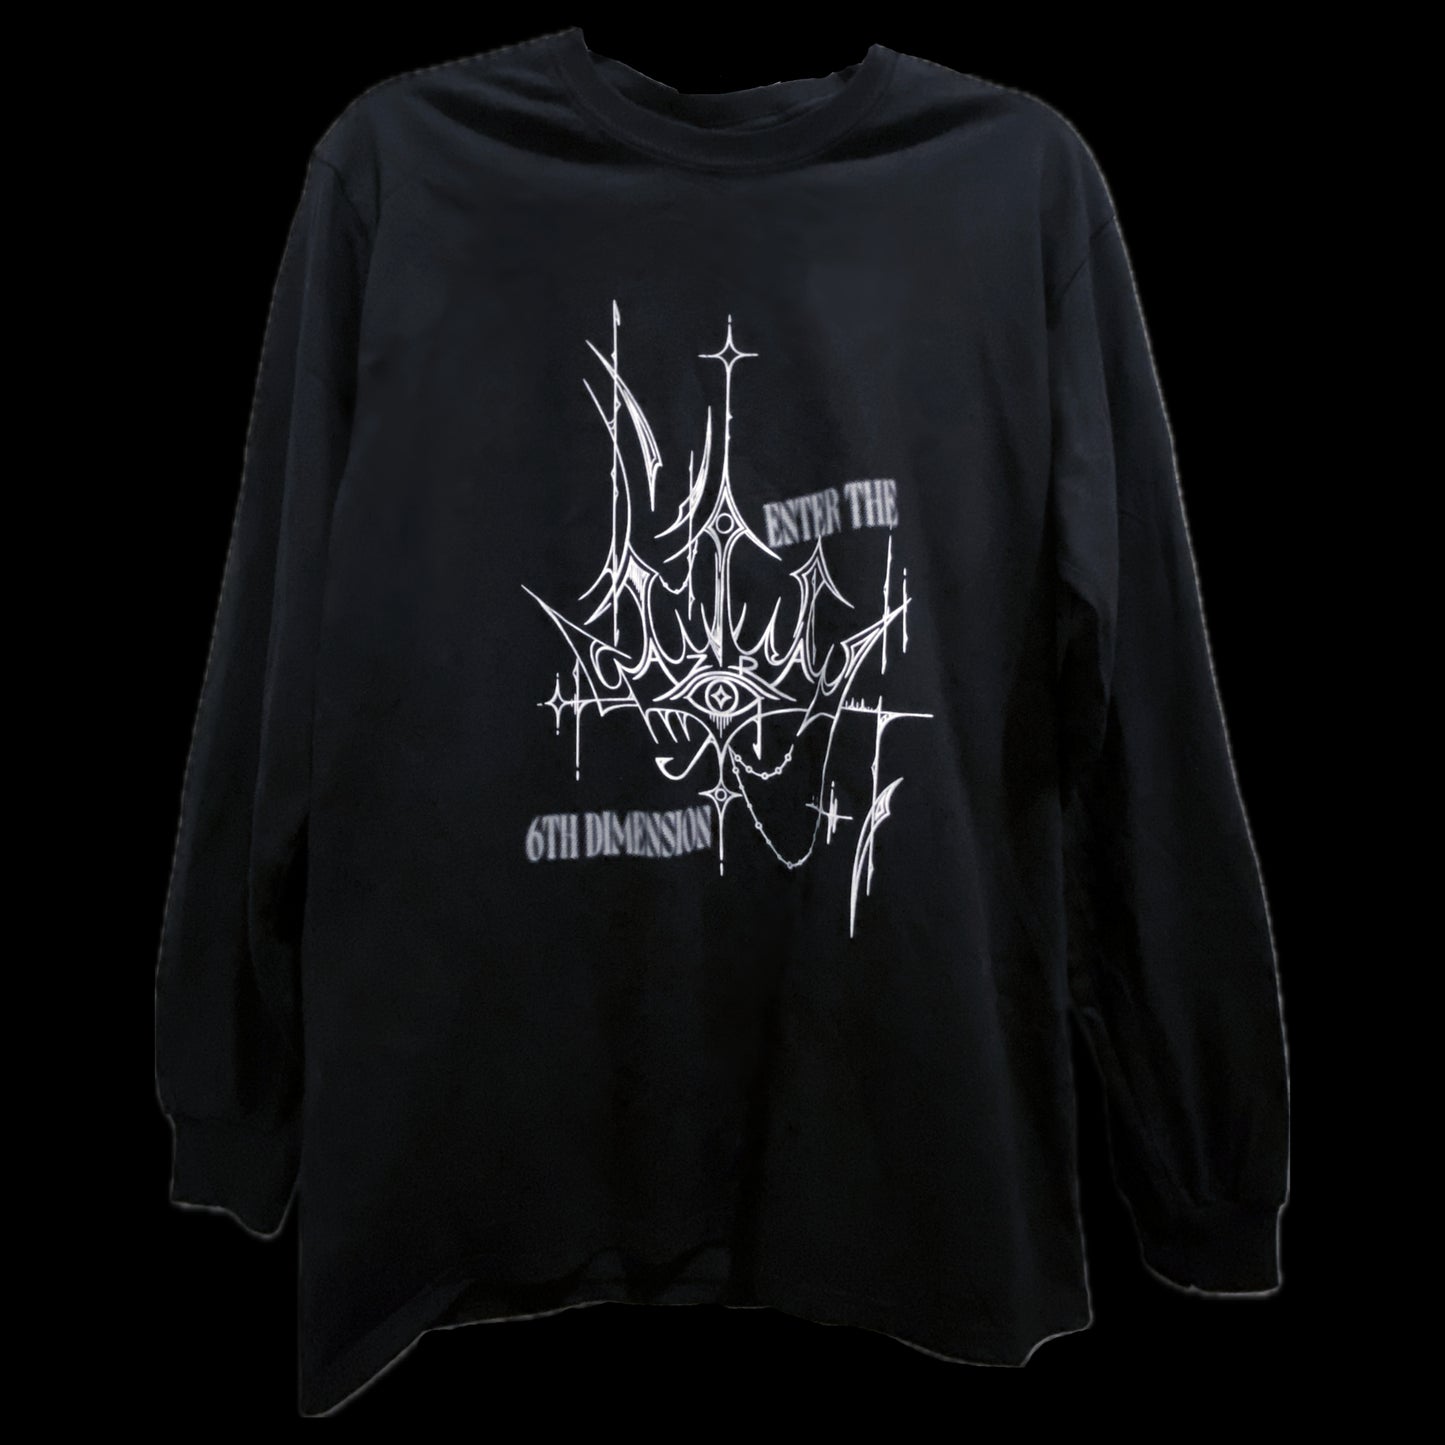 [PRE-ORDER NOW] LIMITED: "6th Dimension" AZRA Merch Capsule Long Sleeve Unisex T-Shirt